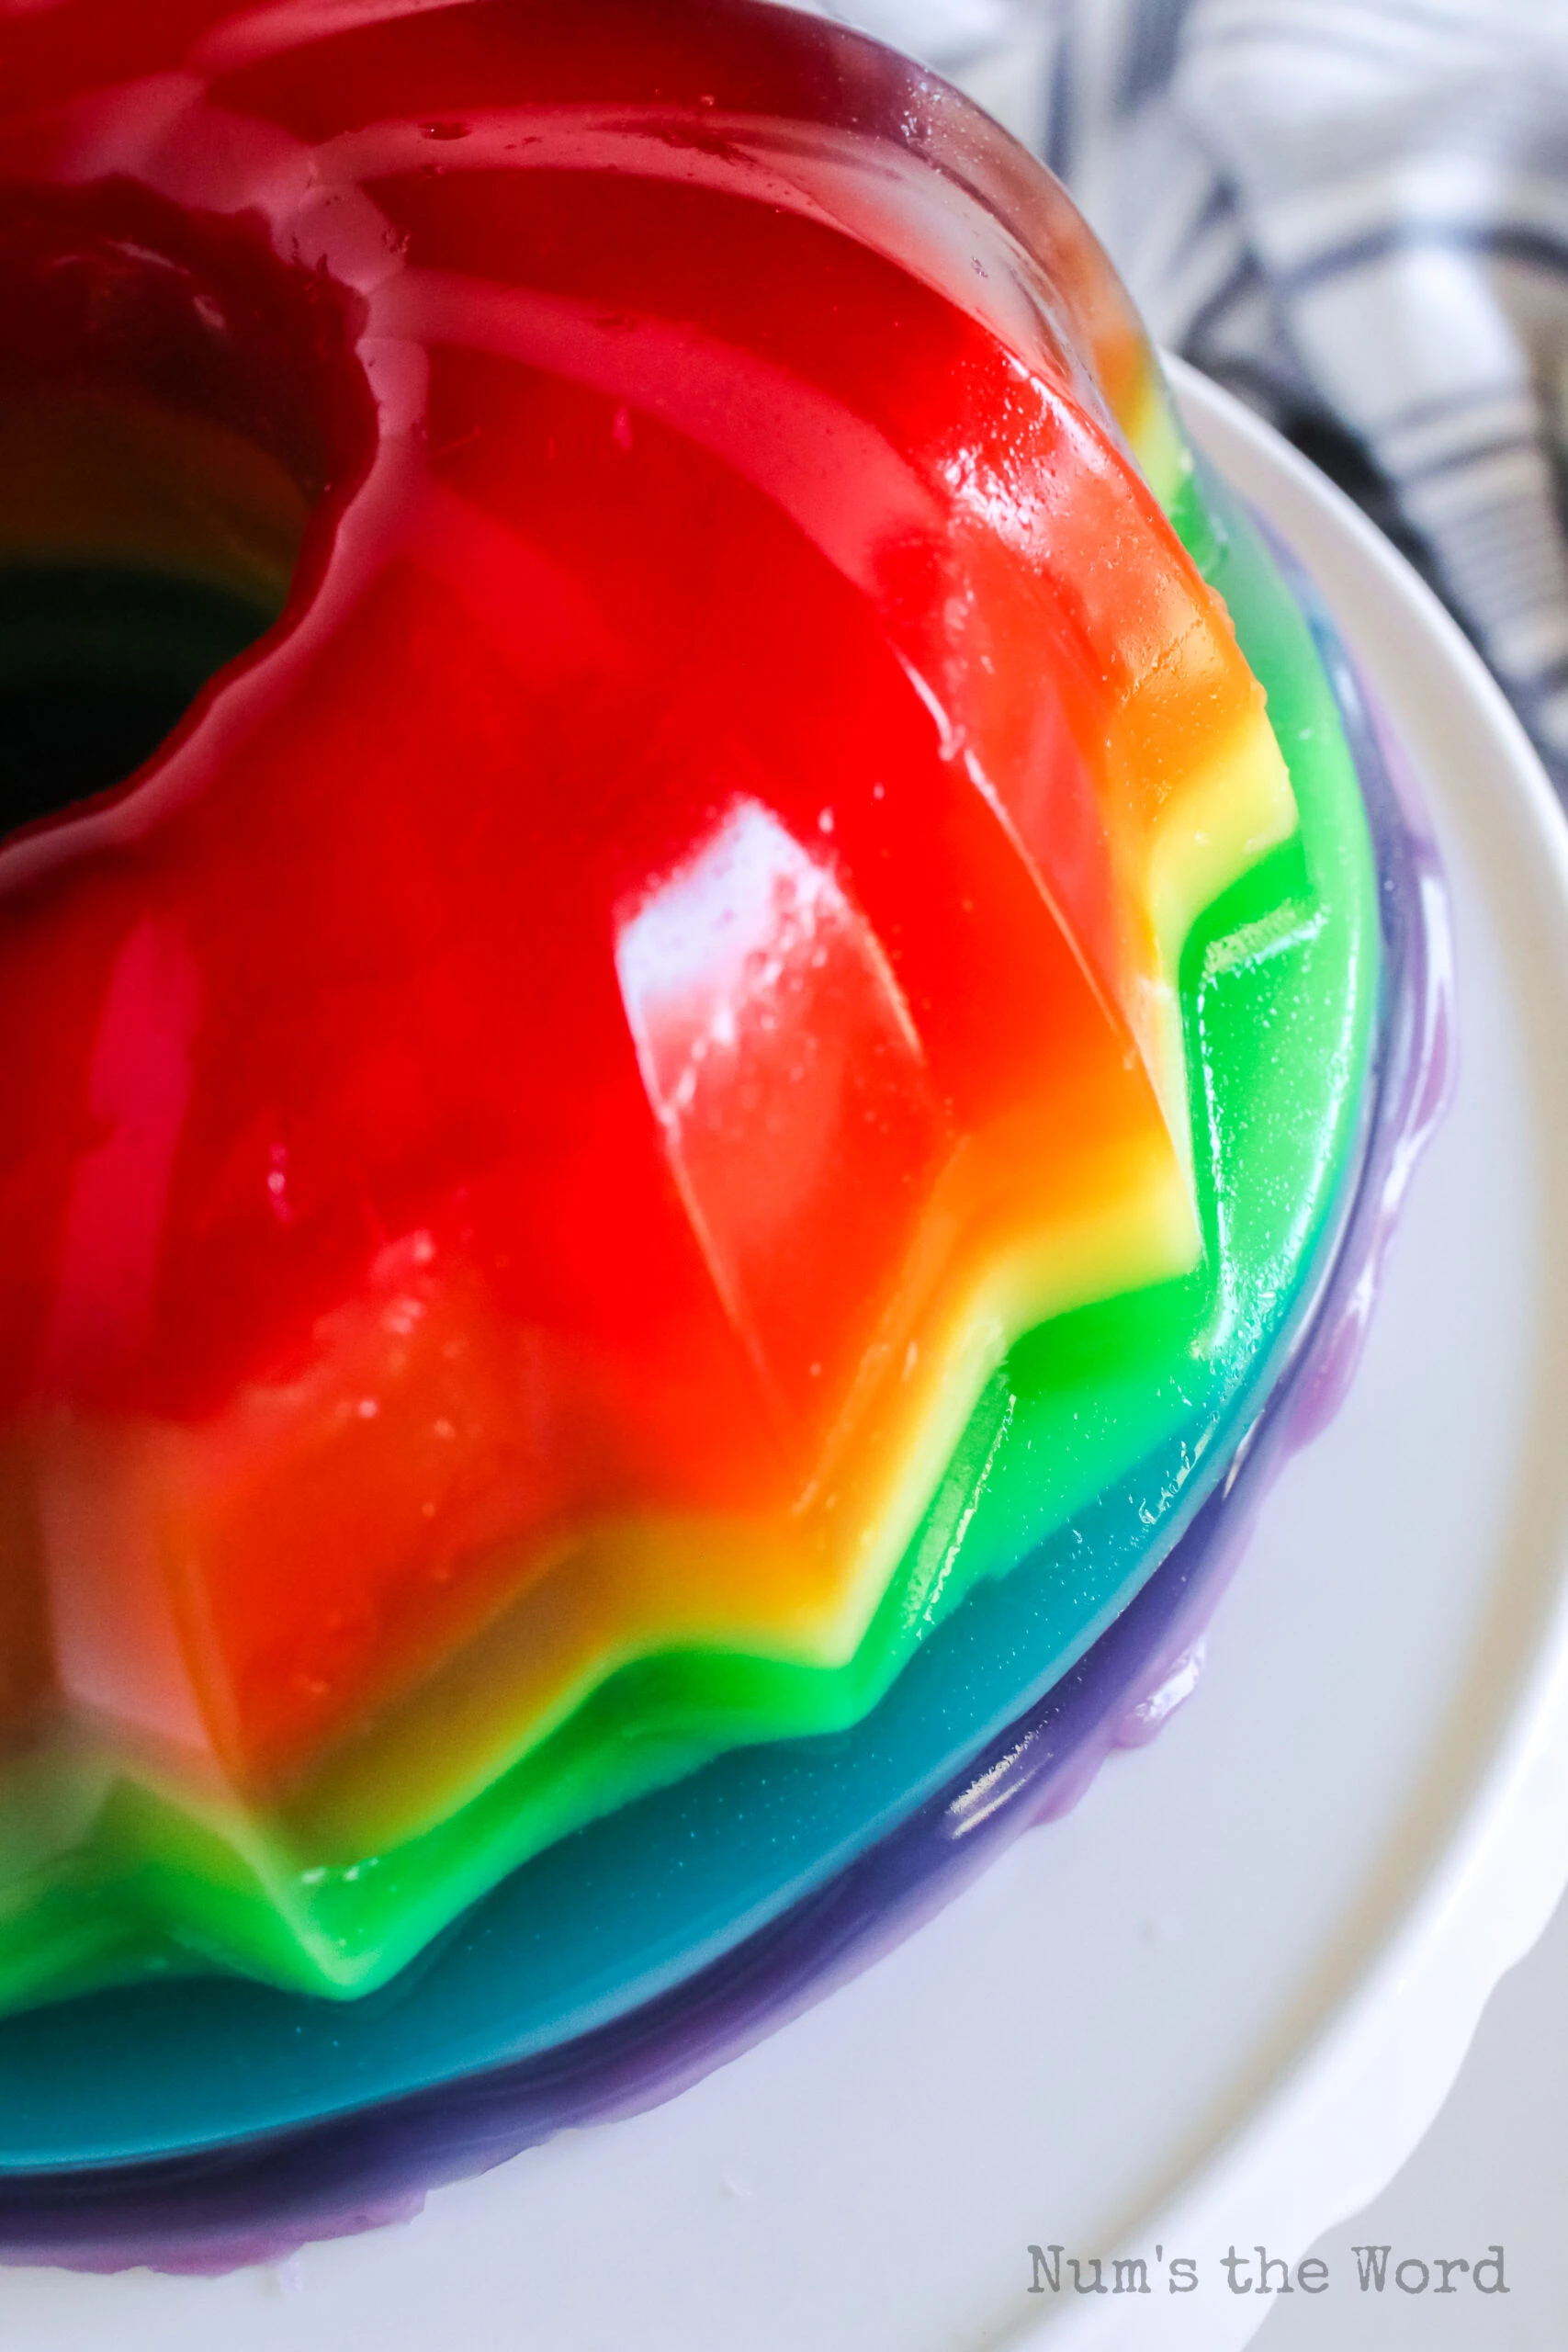 zoomed in image of uncut jello in mold showing the layers